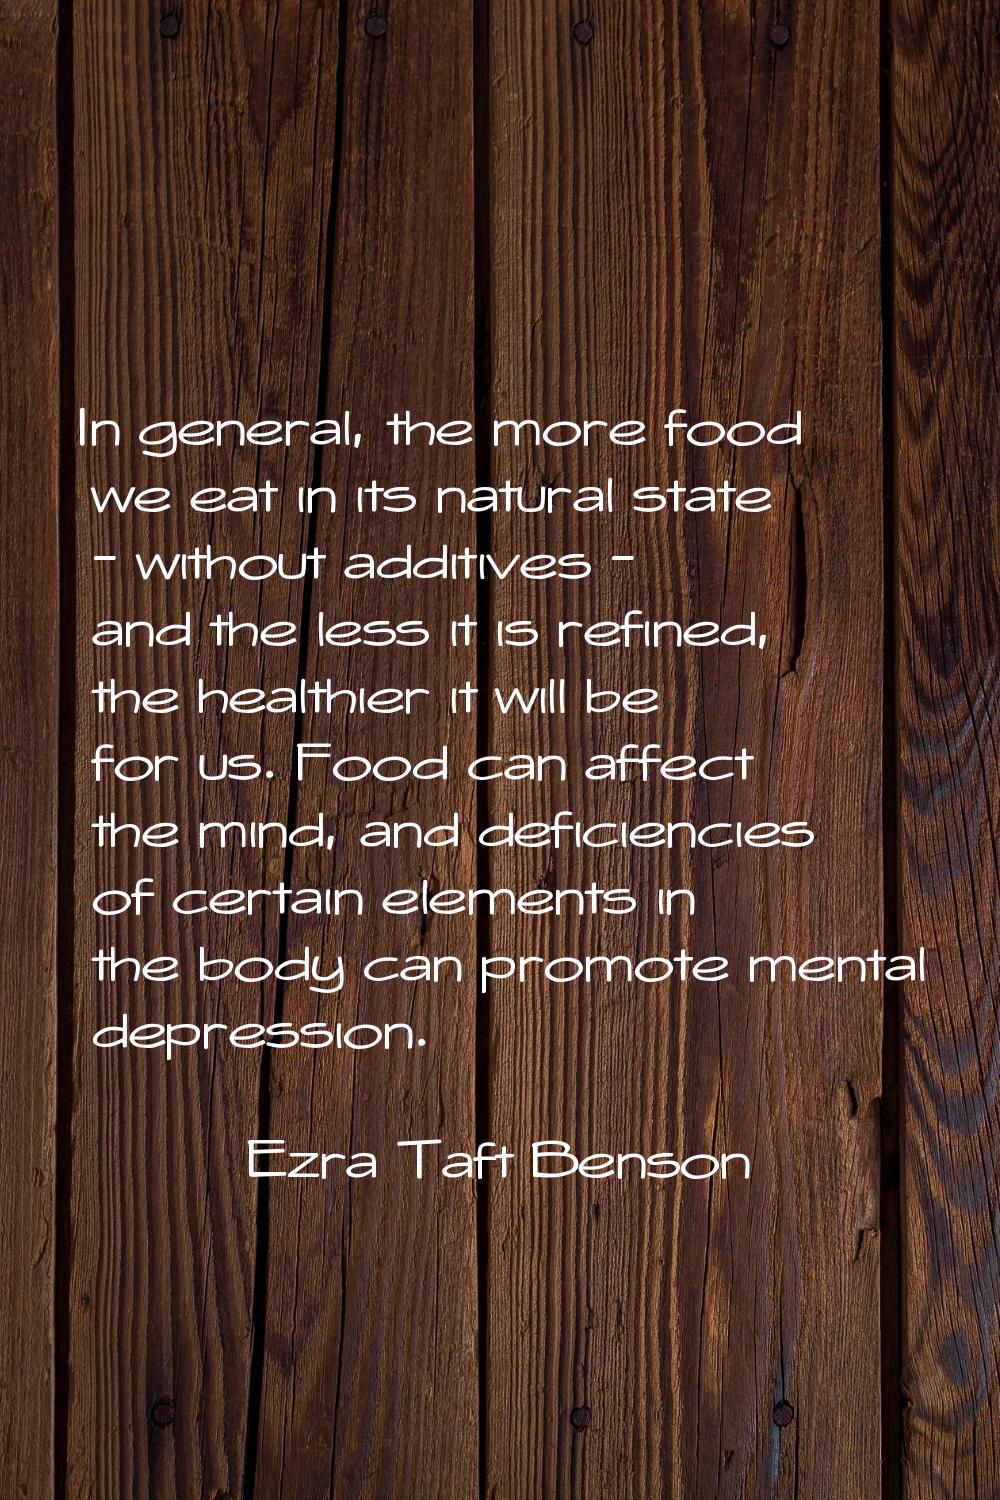 In general, the more food we eat in its natural state - without additives - and the less it is refi